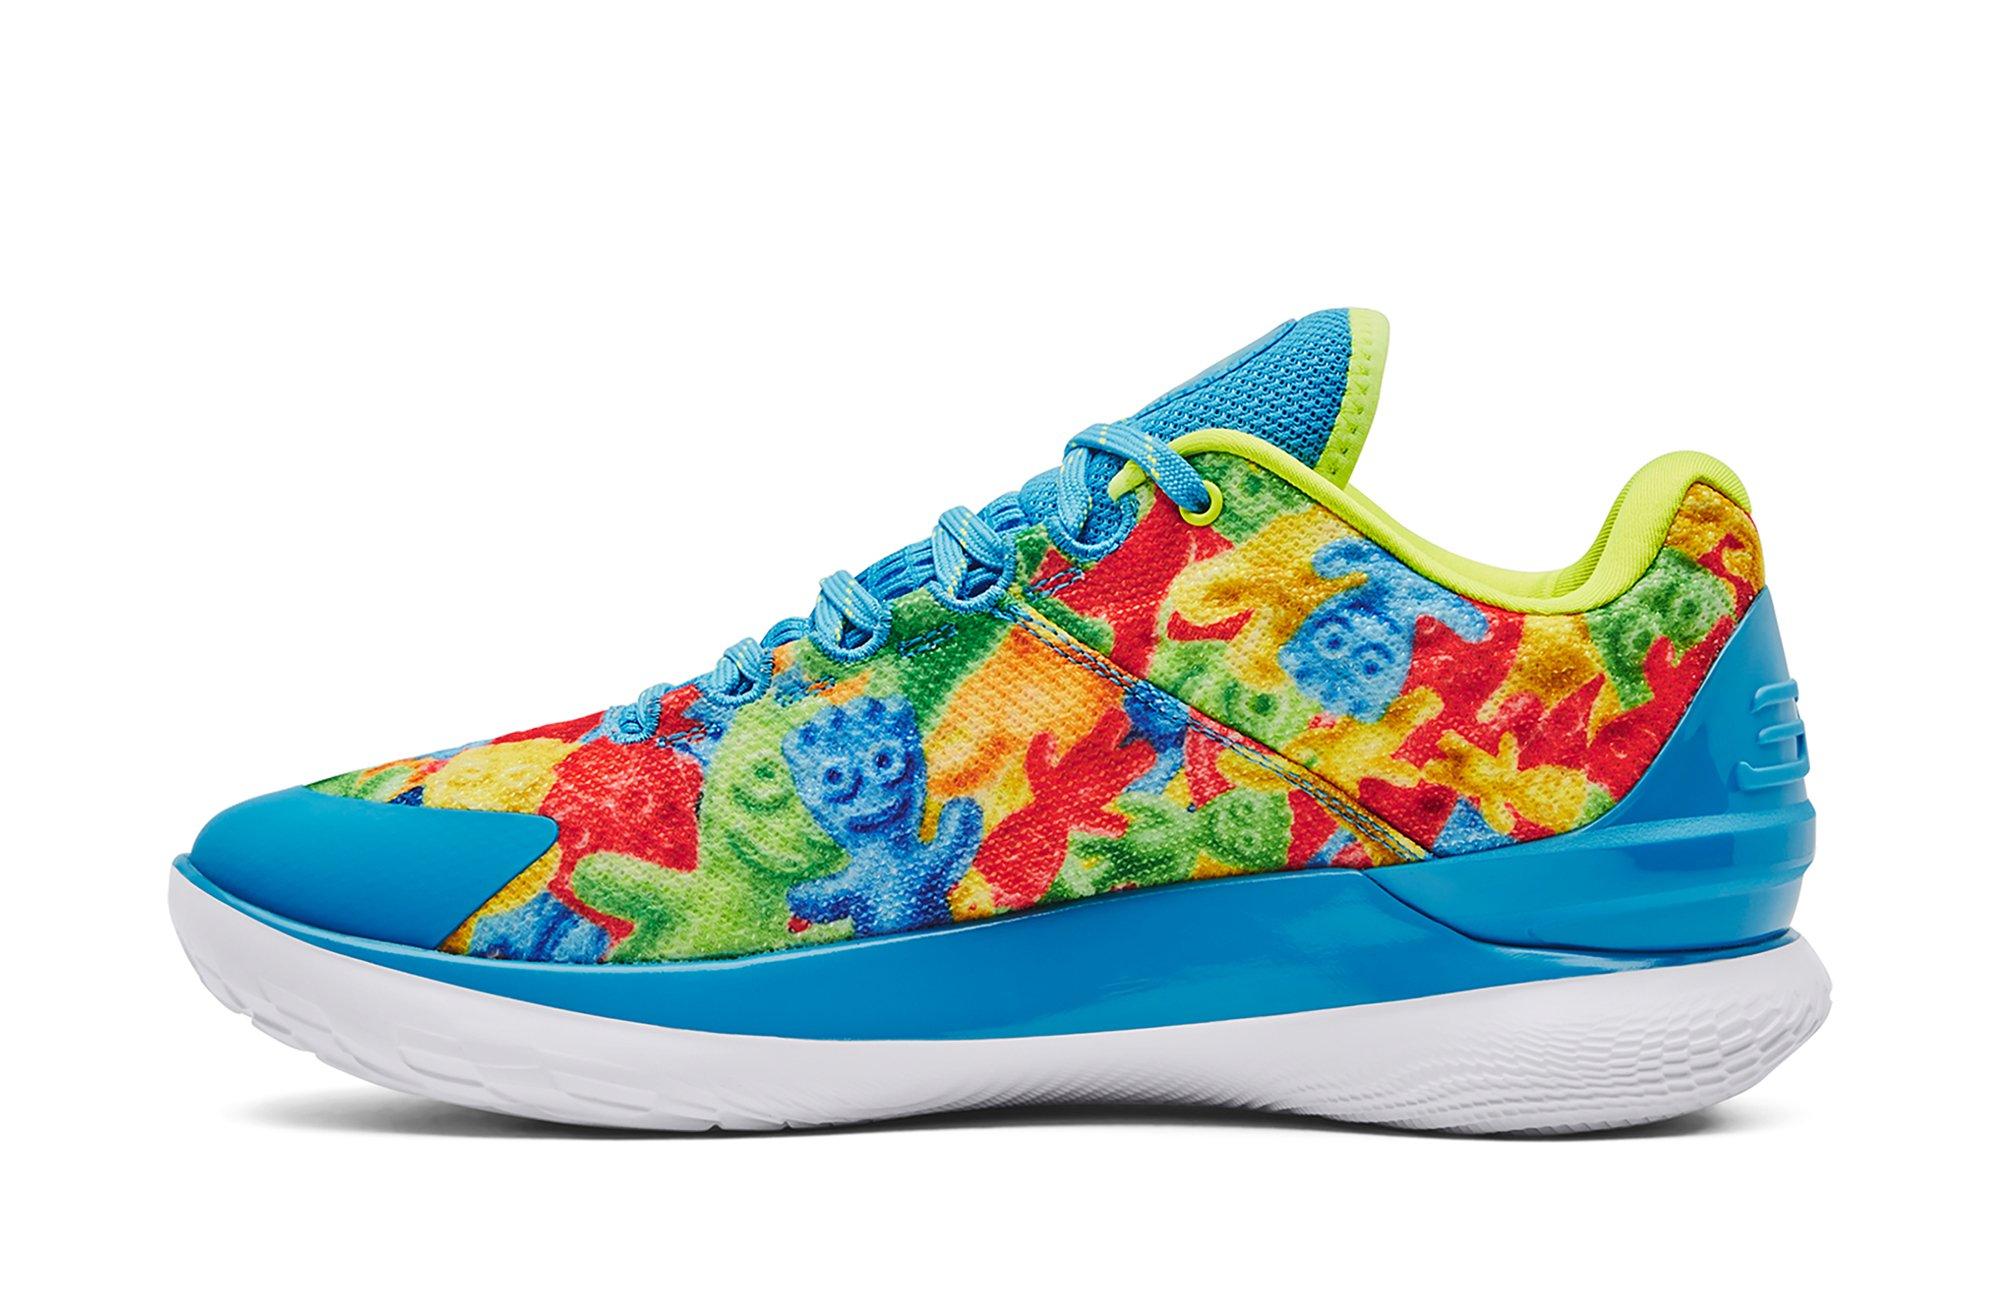 Sour Patch Kids Inspire The Latest Under Armour Curry 10 - Sneaker